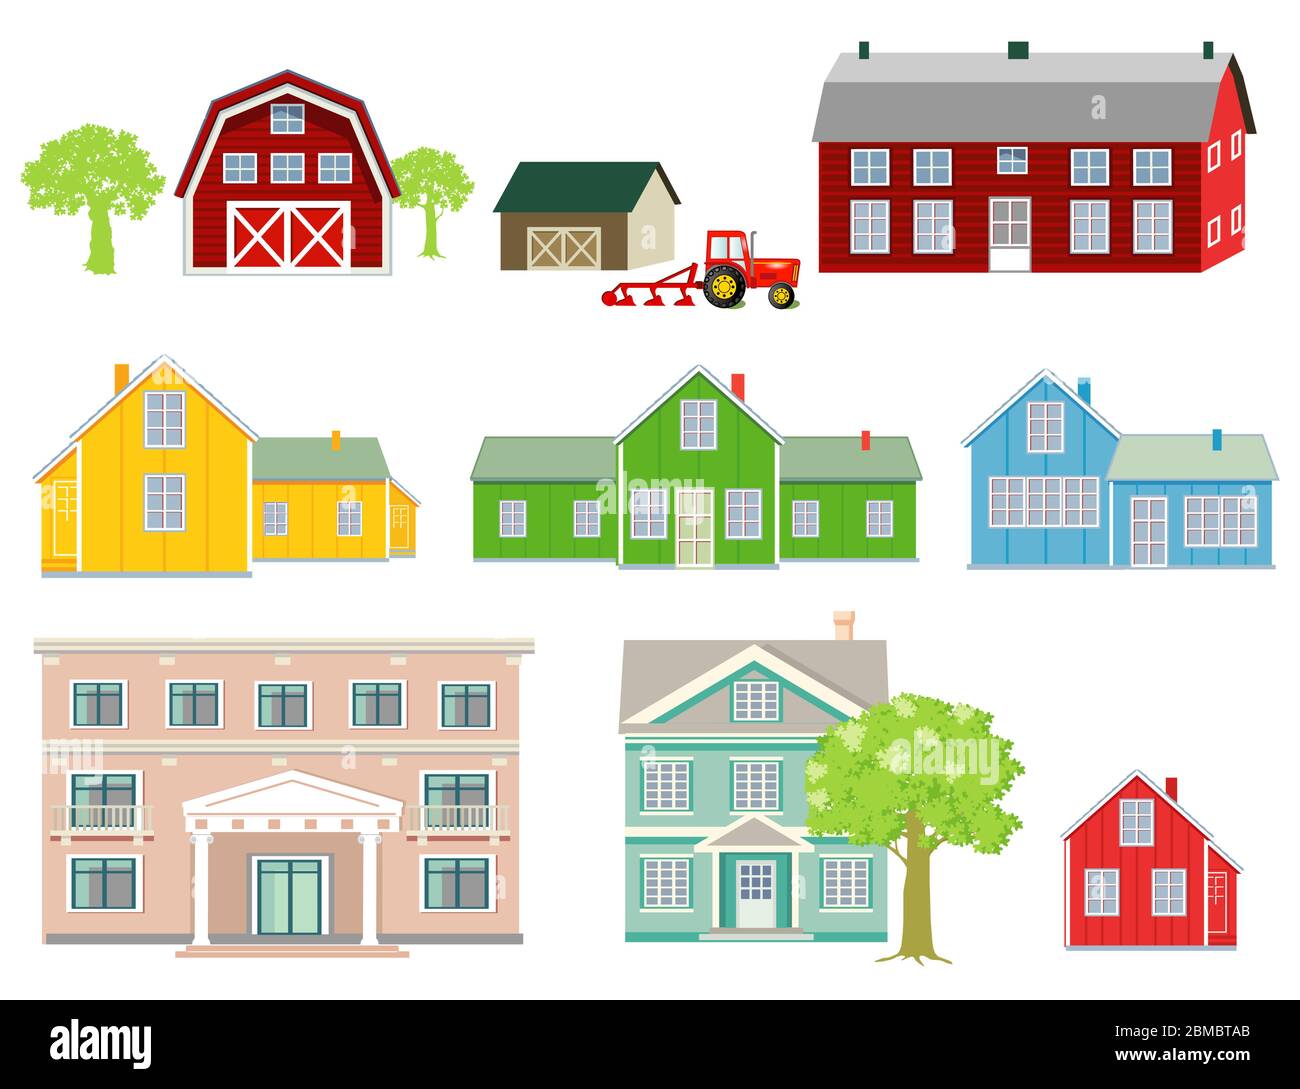 various wooden houses, farm houses, country houses, family houses, Stock Vector